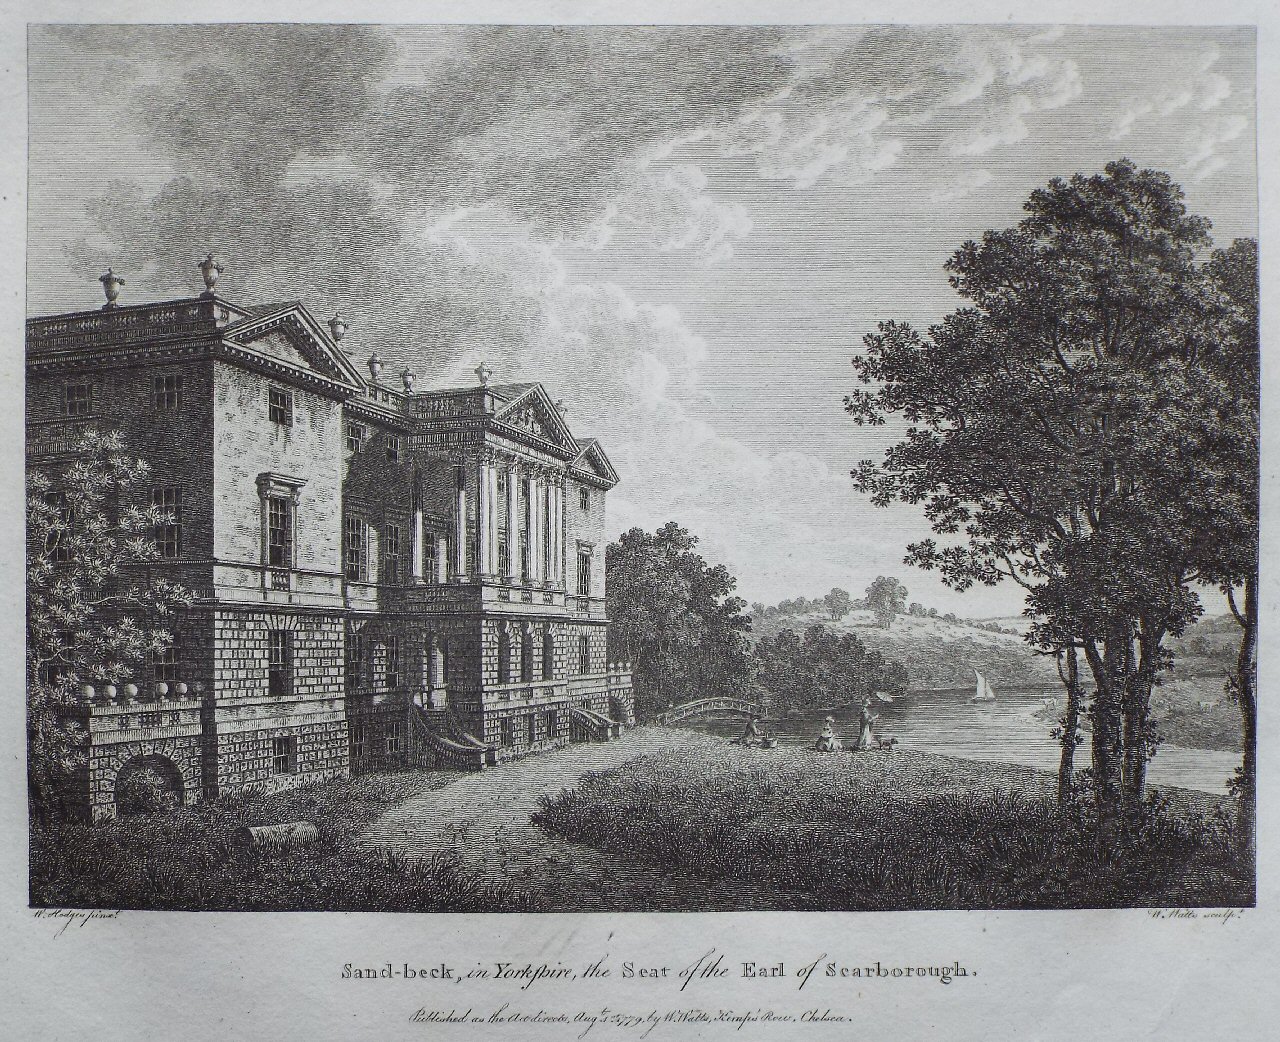 Print - Sand-beck, in Yorkshire, the Seat of the Earl of Scarborough - Watts